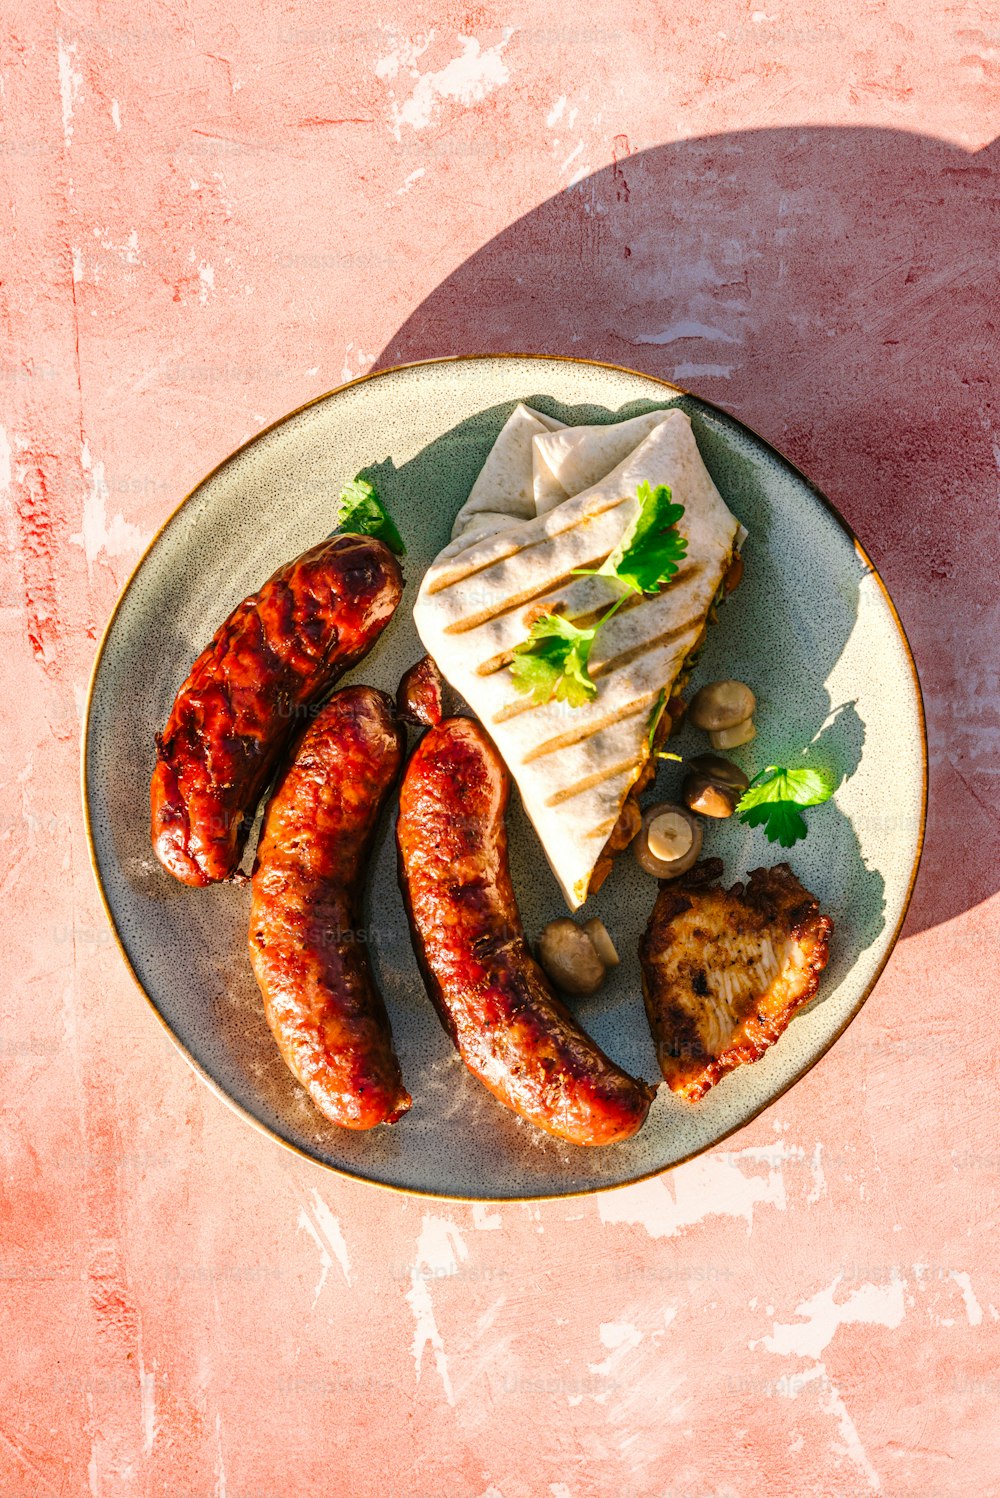 a plate of sausages, bread, and vegetables on a table